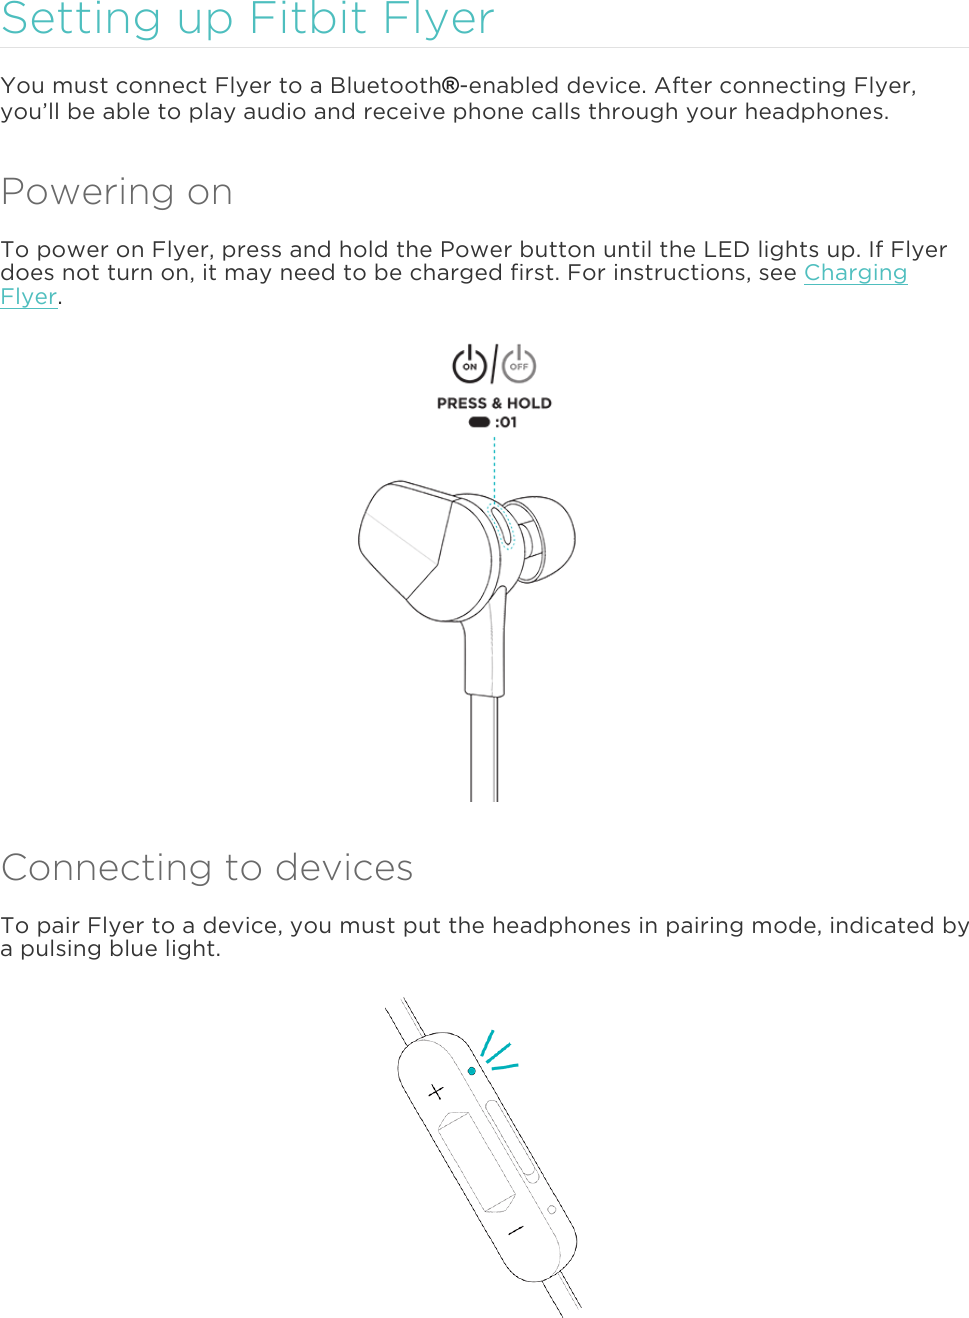 Setting up Fitbit Flyer You must connect Flyer to a Bluetooth®-enabled device. After connecting Flyer,you’ll be able to play audio and receive phone calls through your headphones. Powering on To power on Flyer, press and hold the Power button until the LED lights up. If Flyer does not turn on, it may need to be charged first. For instructions, see Charging Flyer. Connecting to devices To pair Flyer to a device, you must put the headphones in pairing mode, indicated by a pulsing blue light.  